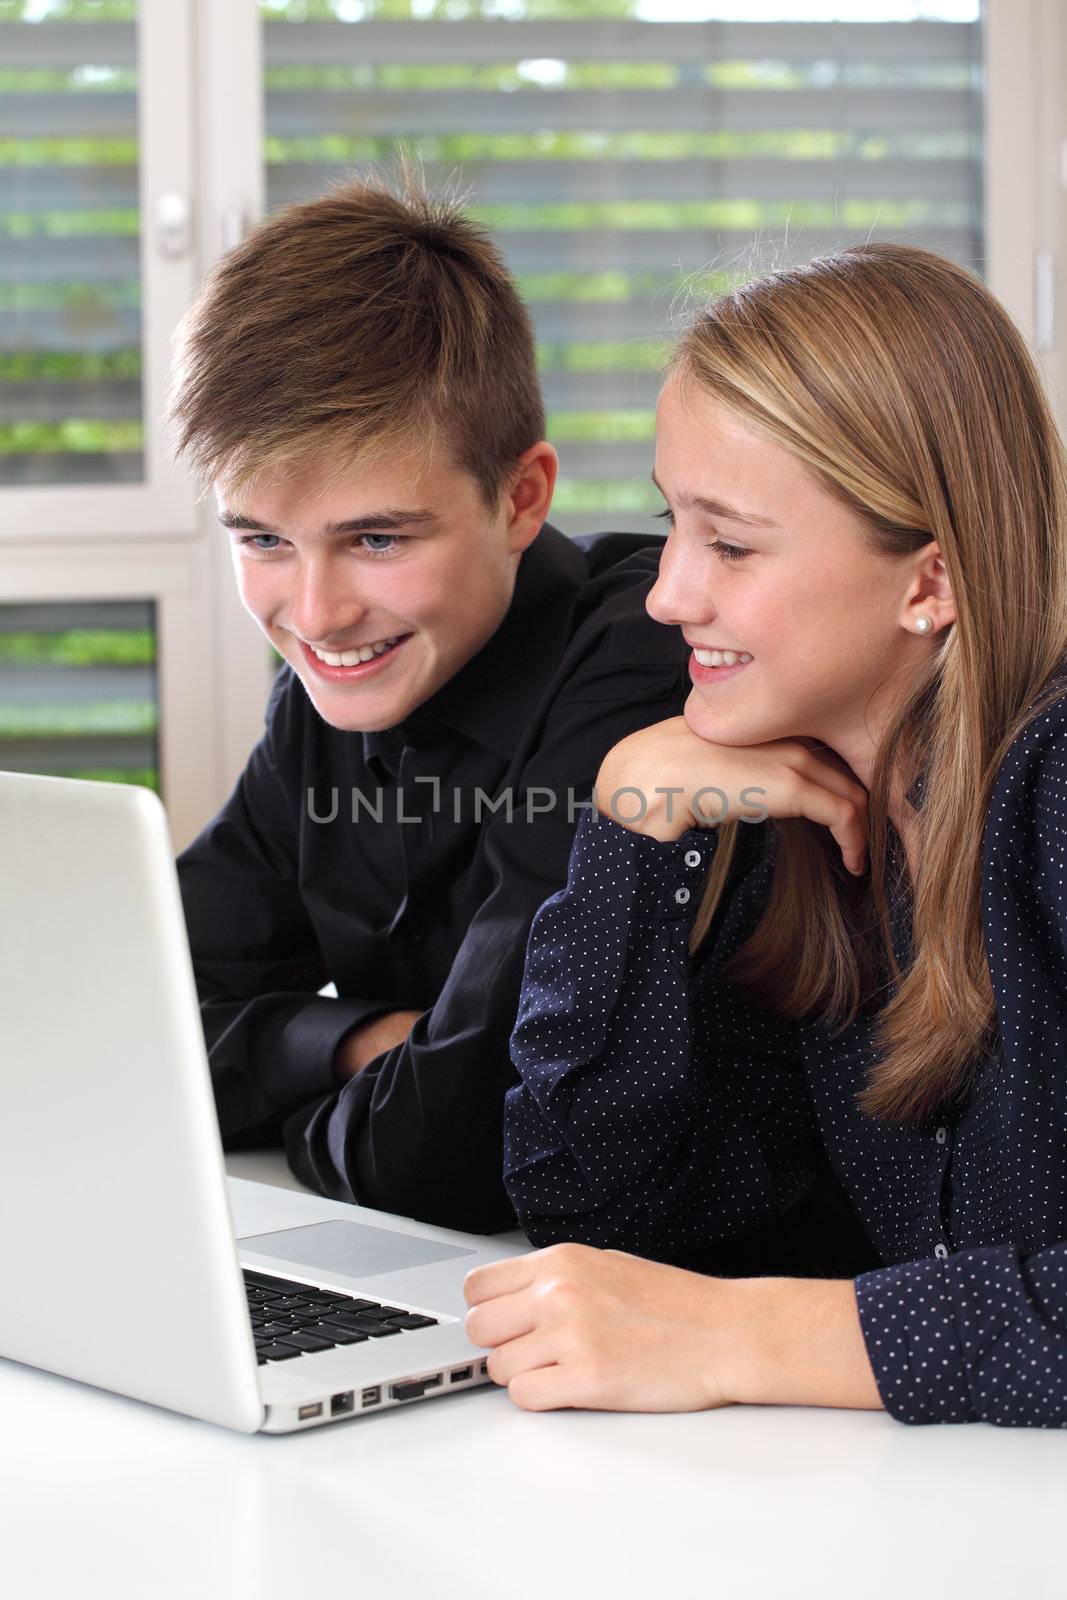 Photo of a young female and male smiling and working with a laptop in their highschool classroom. Focus on female face.